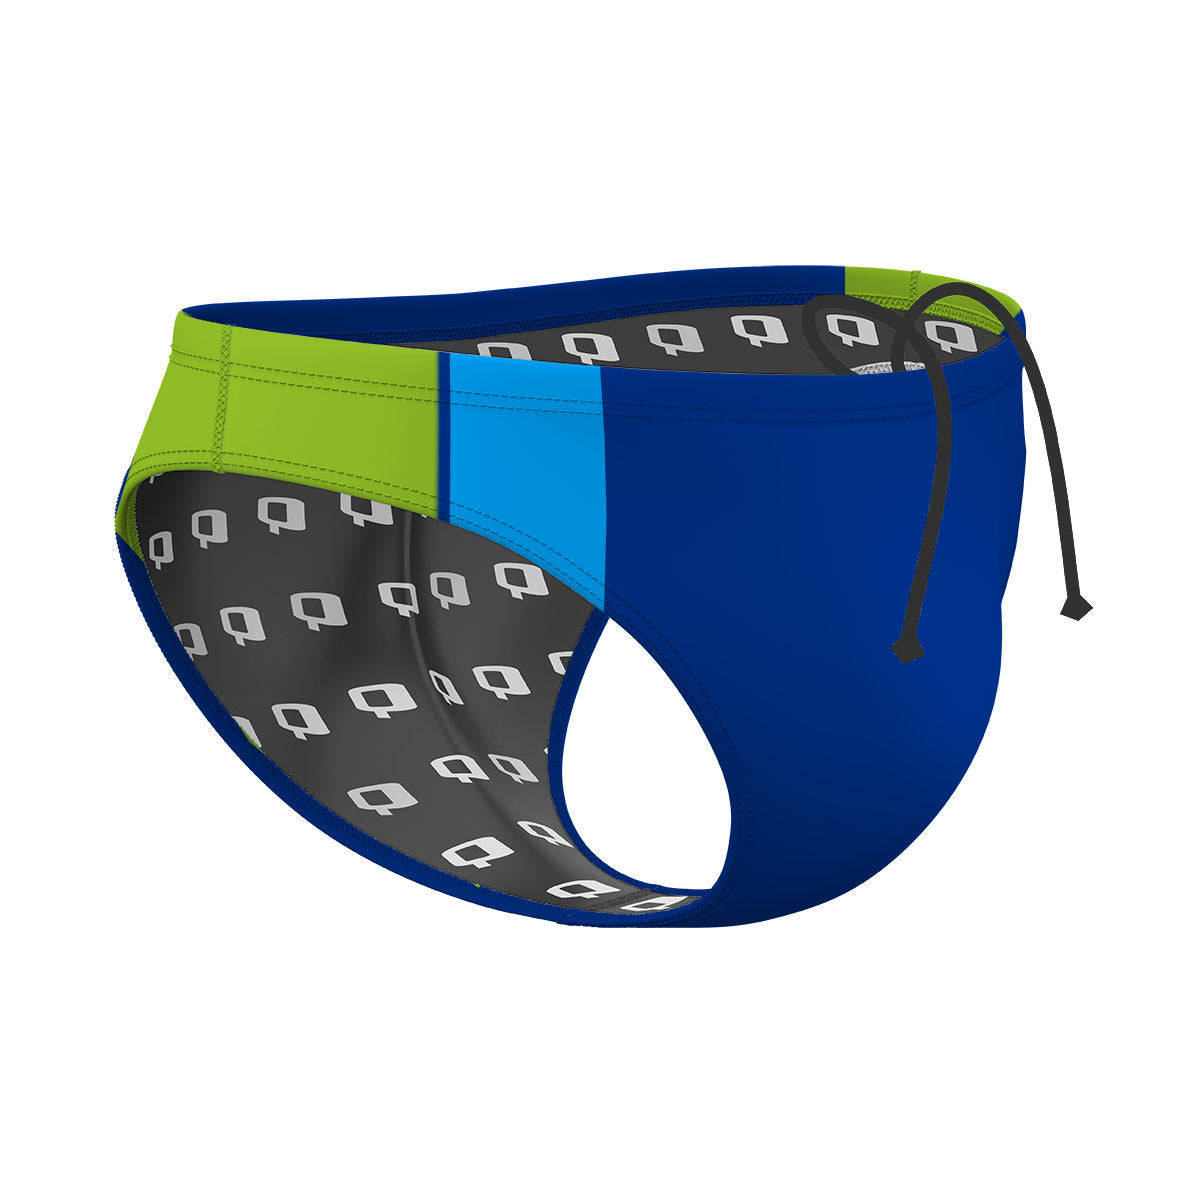 Blues and Green - Waterpolo Brief Swimsuit